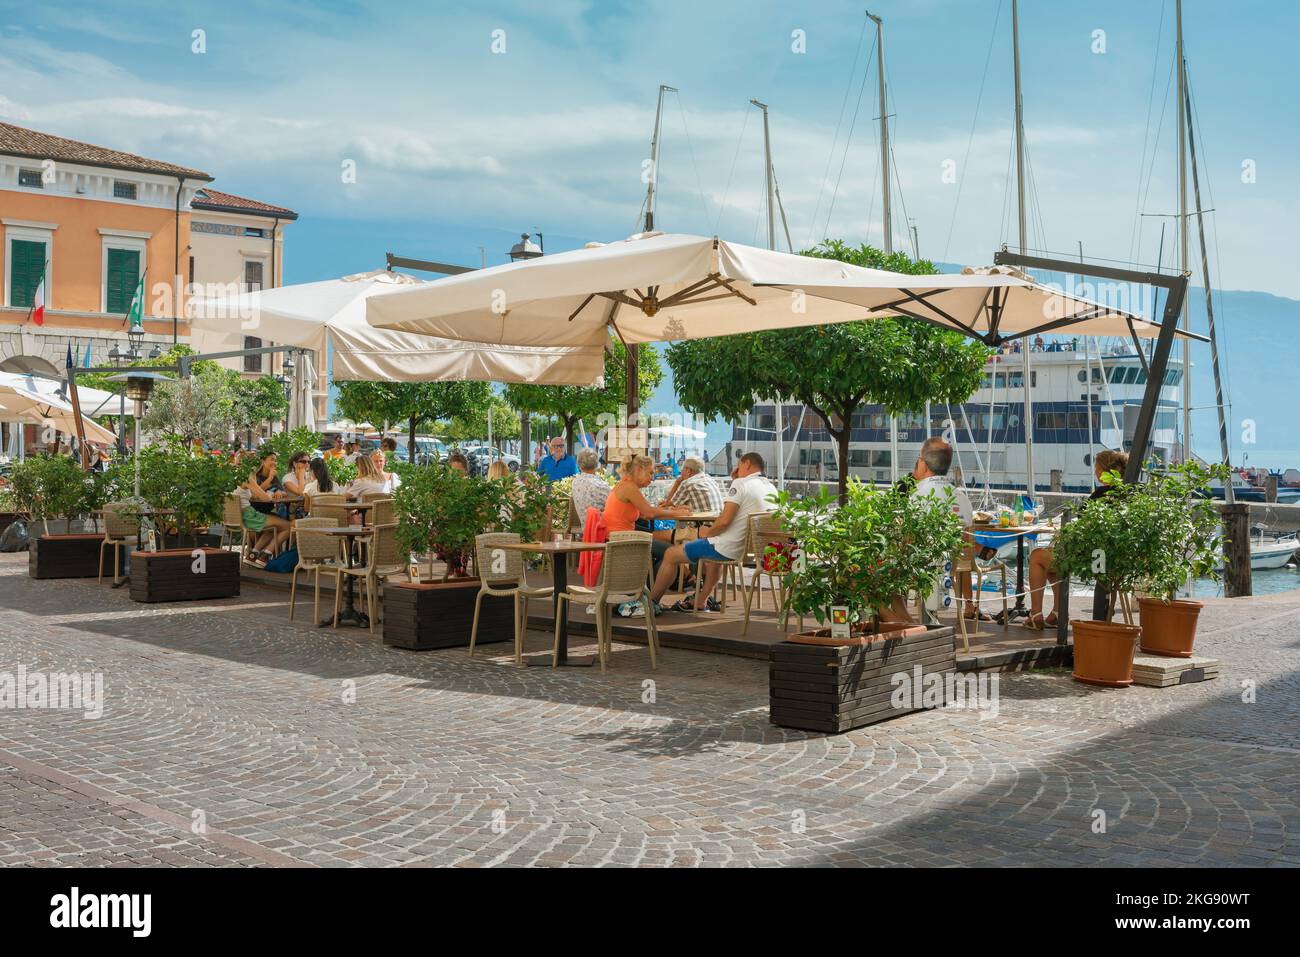 Italy lake summer, view of people relaxing at a lakeside cafe terrace in Piazza Feltrinelli in the scenic Lake Garda town of Gargnano, Lombardy, Italy Stock Photo